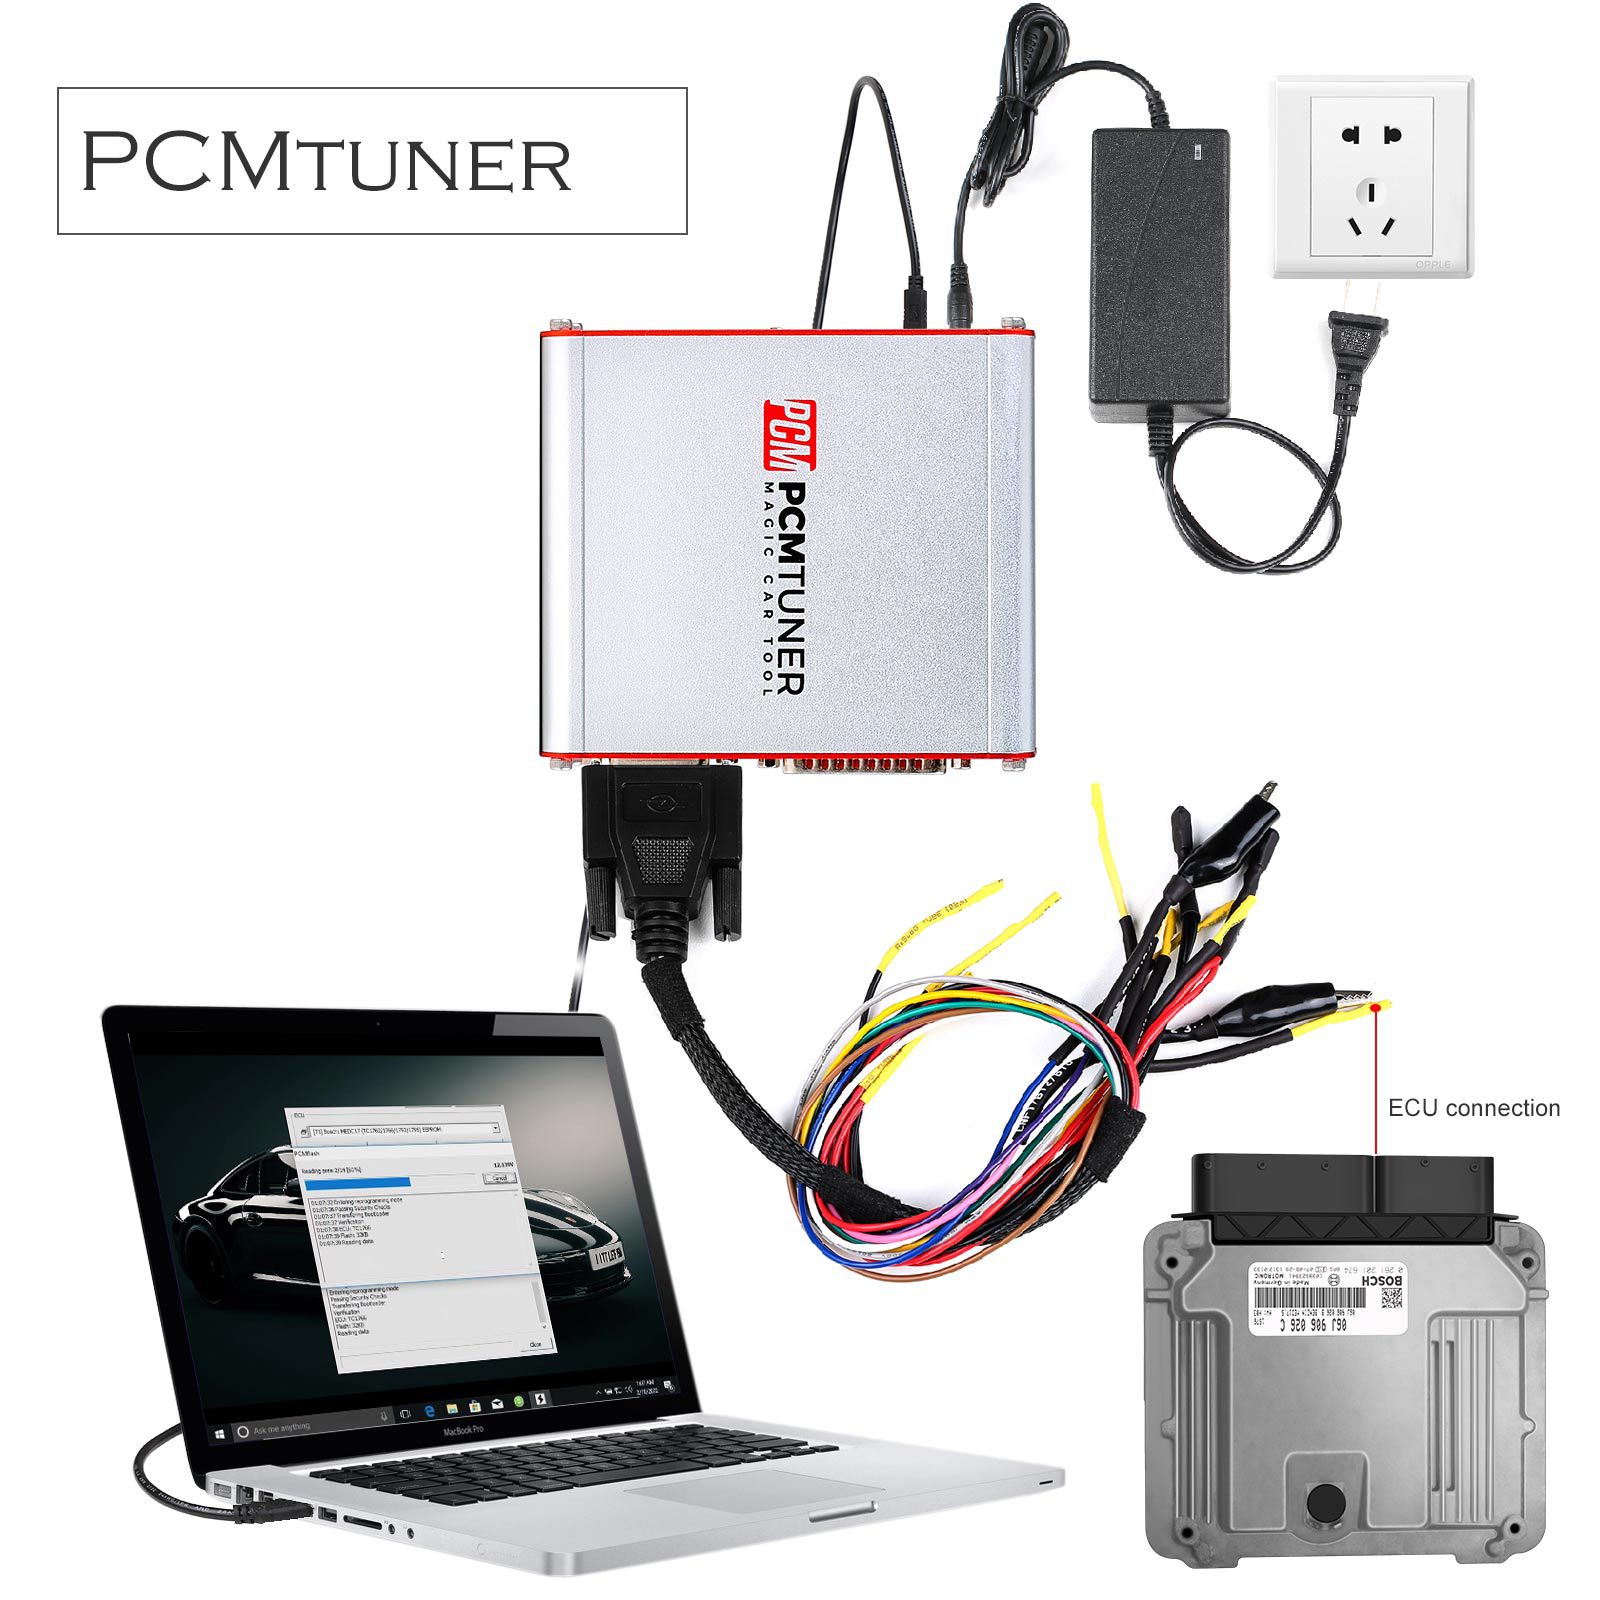 PCMtuner V1.25 ECU Programmer Support 67 Models Online Update Support Checksum and Pinout Diagram with Free Damaos for Users